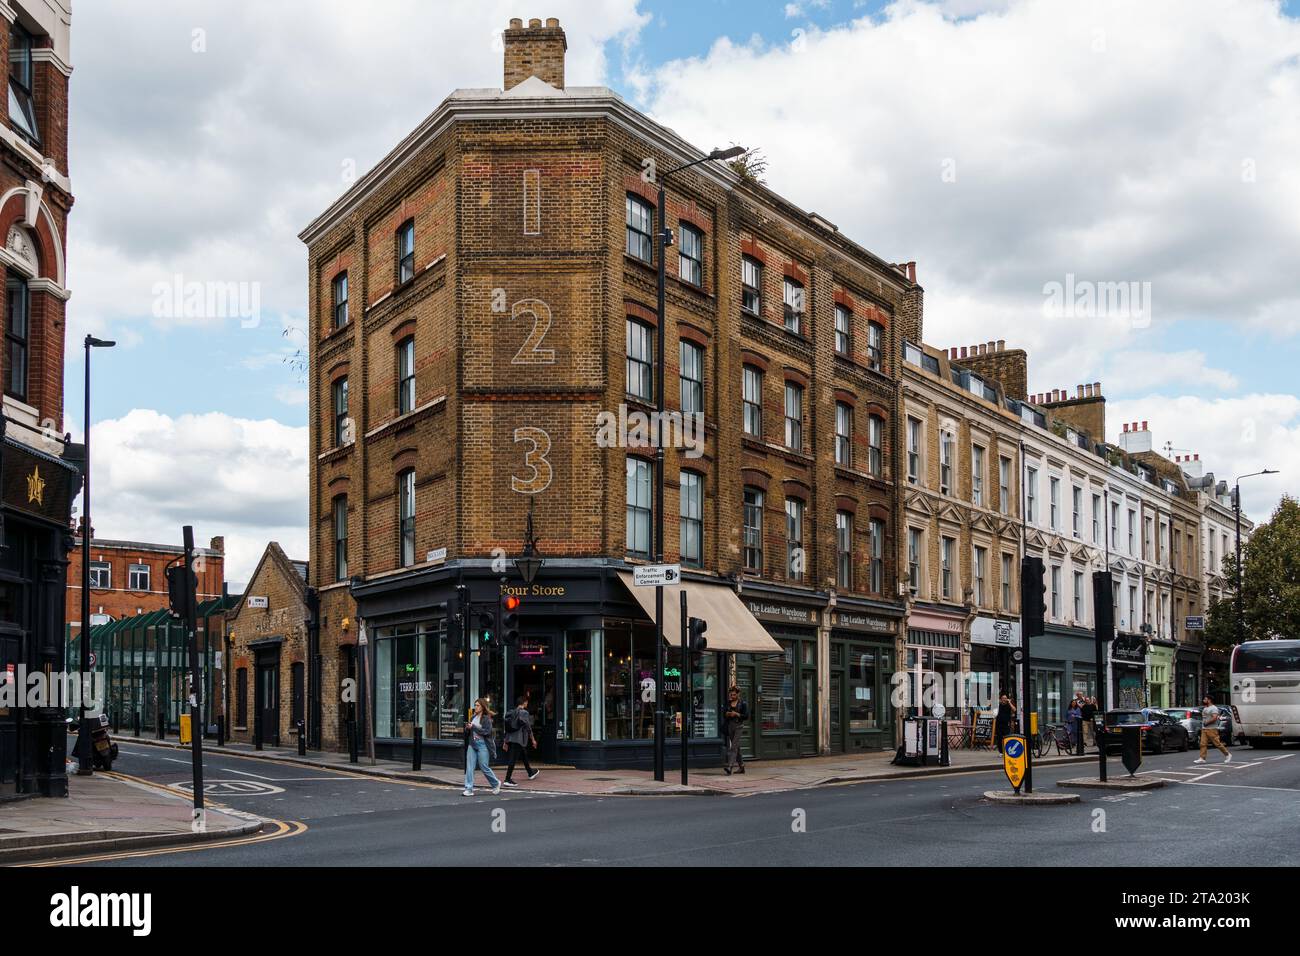 London, UK - August 25, 2023: Bethnal Green Road. It is a street located in Shoreditch, near Brick Lane. Four Store terrarium specialist store Stock Photo